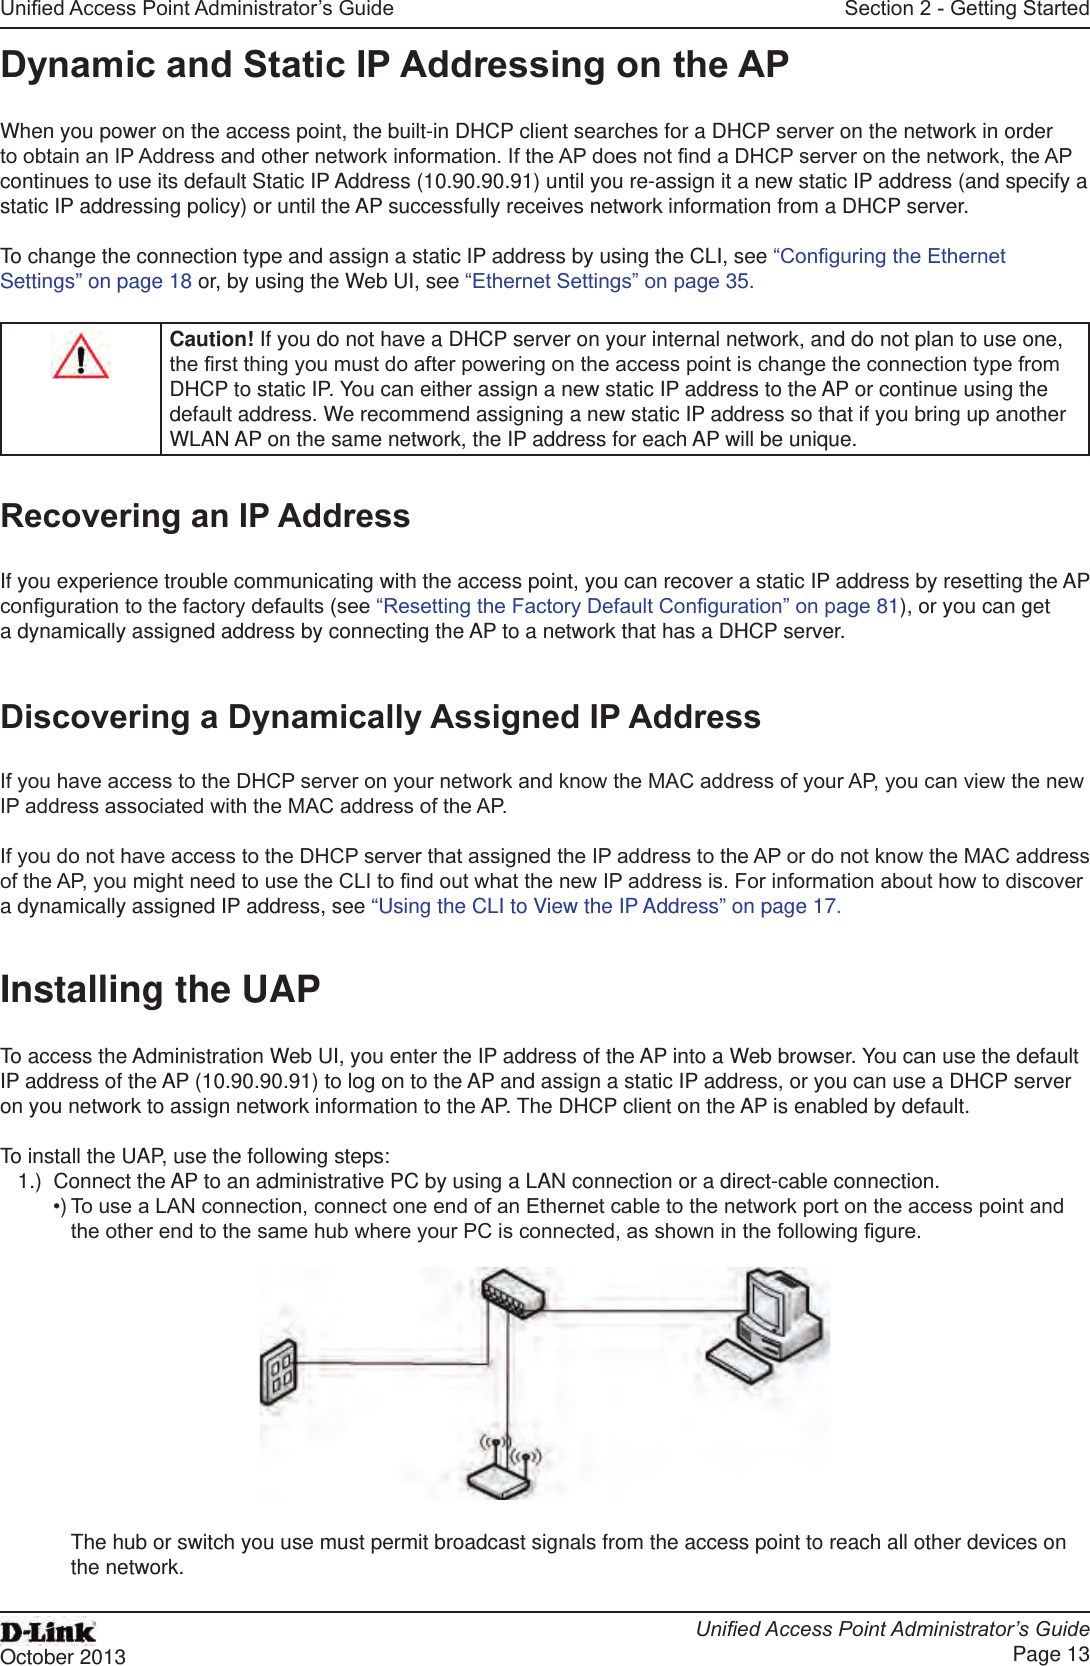 Unied Access Point Administrator’s GuideUnied Access Point Administrator’s GuidePage 13October 2013Section 2 - Getting StartedDynamic and Static IP Addressing on the APWhen you power on the access point, the built-in DHCP client searches for a DHCP server on the network in order to obtain an IP Address and other network information. If the AP does not nd a DHCP server on the network, the AP continues to use its default Static IP Address (10.90.90.91) until you re-assign it a new static IP address (and specify a static IP addressing policy) or until the AP successfully receives network information from a DHCP server.To change the connection type and assign a static IP address by using the CLI, see “Conguring the Ethernet Settings” on page 18 or, by using the Web UI, see “Ethernet Settings” on page 35.Caution! If you do not have a DHCP server on your internal network, and do not plan to use one, the rst thing you must do after powering on the access point is change the connection type from DHCP to static IP. You can either assign a new static IP address to the AP or continue using the default address. We recommend assigning a new static IP address so that if you bring up another WLAN AP on the same network, the IP address for each AP will be unique.Recovering an IP AddressIf you experience trouble communicating with the access point, you can recover a static IP address by resetting the AP conguration to the factory defaults (see “Resetting the Factory Default Conguration” on page 81), or you can get a dynamically assigned address by connecting the AP to a network that has a DHCP server.Discovering a Dynamically Assigned IP AddressIf you have access to the DHCP server on your network and know the MAC address of your AP, you can view the new IP address associated with the MAC address of the AP. If you do not have access to the DHCP server that assigned the IP address to the AP or do not know the MAC address of the AP, you might need to use the CLI to nd out what the new IP address is. For information about how to discover a dynamically assigned IP address, see “Using the CLI to View the IP Address” on page 17.Installing the UAPTo access the Administration Web UI, you enter the IP address of the AP into a Web browser. You can use the default IP address of the AP (10.90.90.91) to log on to the AP and assign a static IP address, or you can use a DHCP server on you network to assign network information to the AP. The DHCP client on the AP is enabled by default.To install the UAP, use the following steps:1.)  Connect the AP to an administrative PC by using a LAN connection or a direct-cable connection. •) To use a LAN connection, connect one end of an Ethernet cable to the network port on the access point and the other end to the same hub where your PC is connected, as shown in the following gure.The hub or switch you use must permit broadcast signals from the access point to reach all other devices on the network.